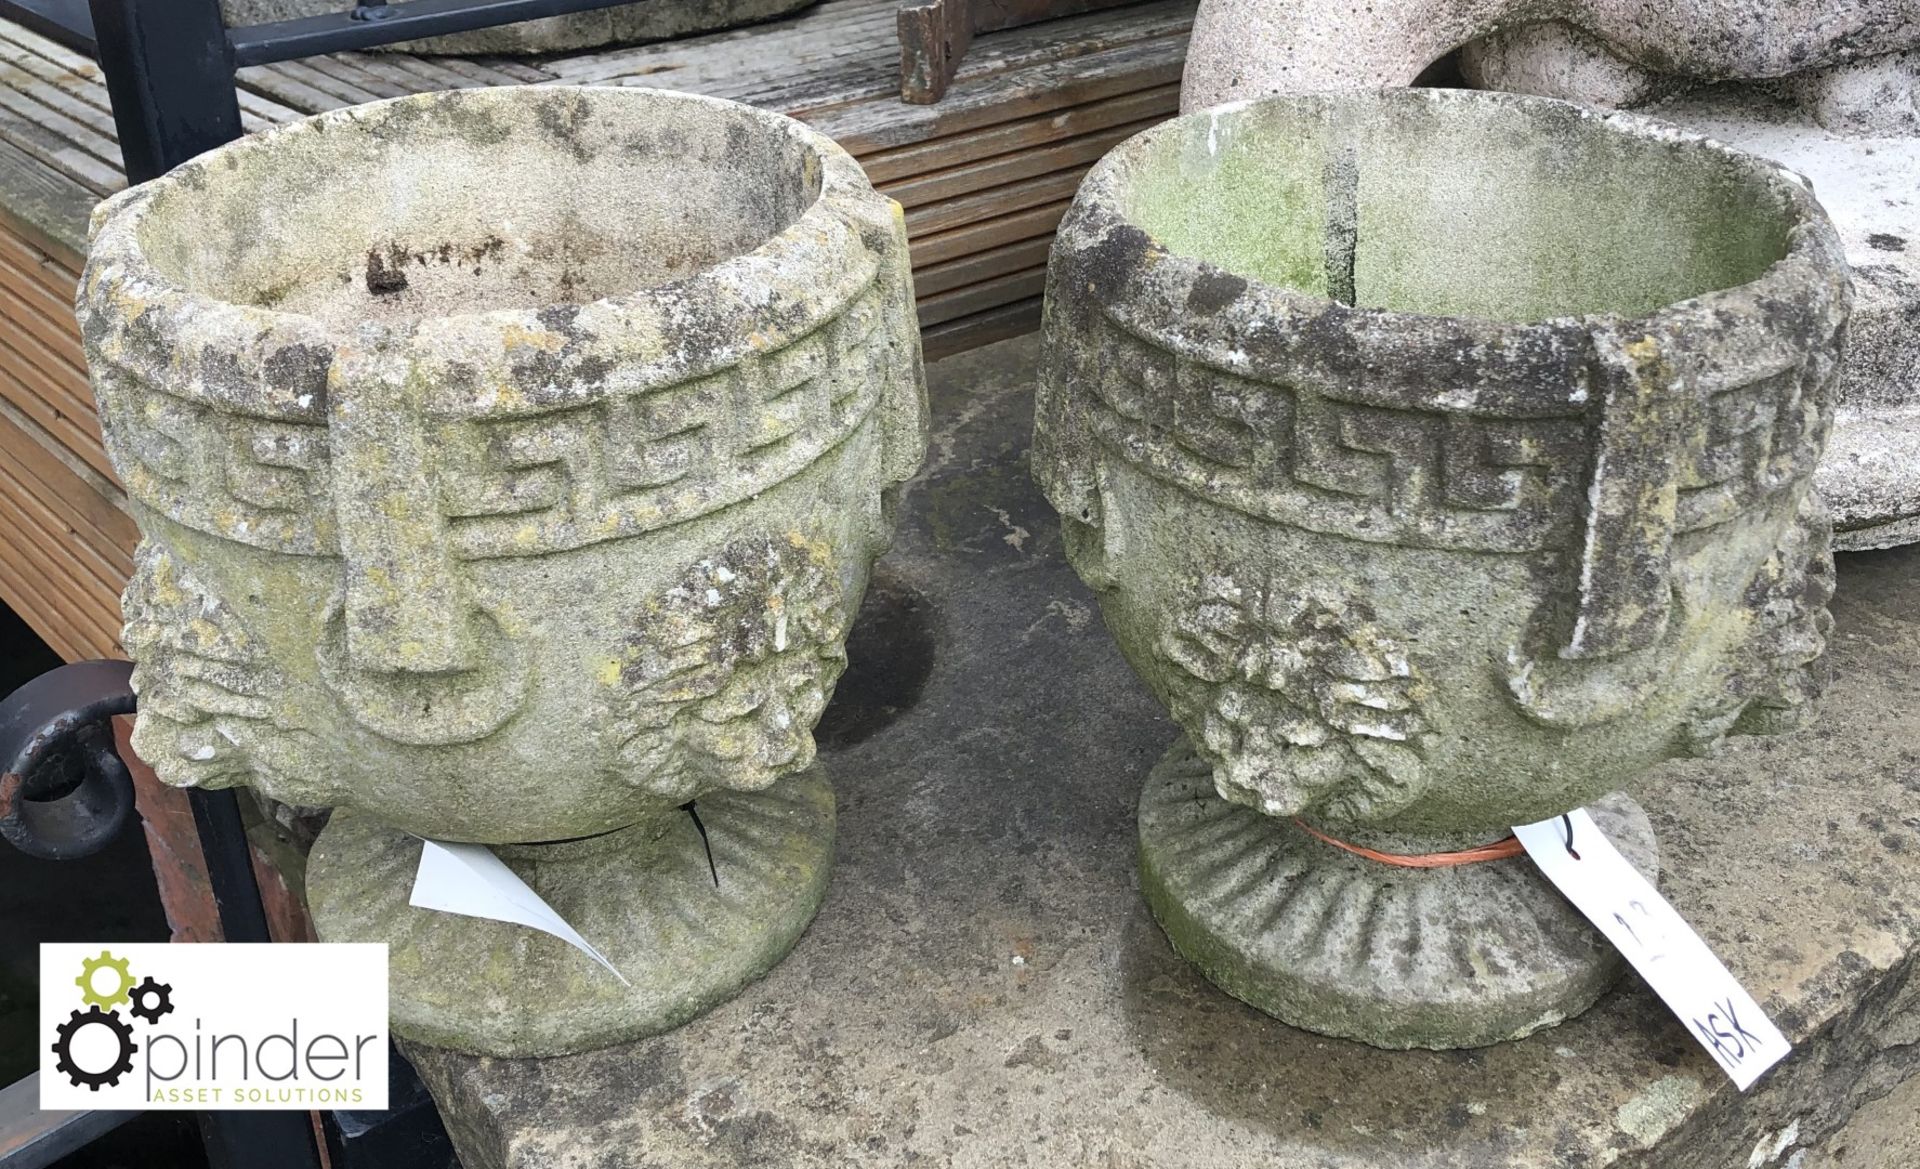 Pair of reconstituted Stone Urns, mid 1900s - Image 2 of 2